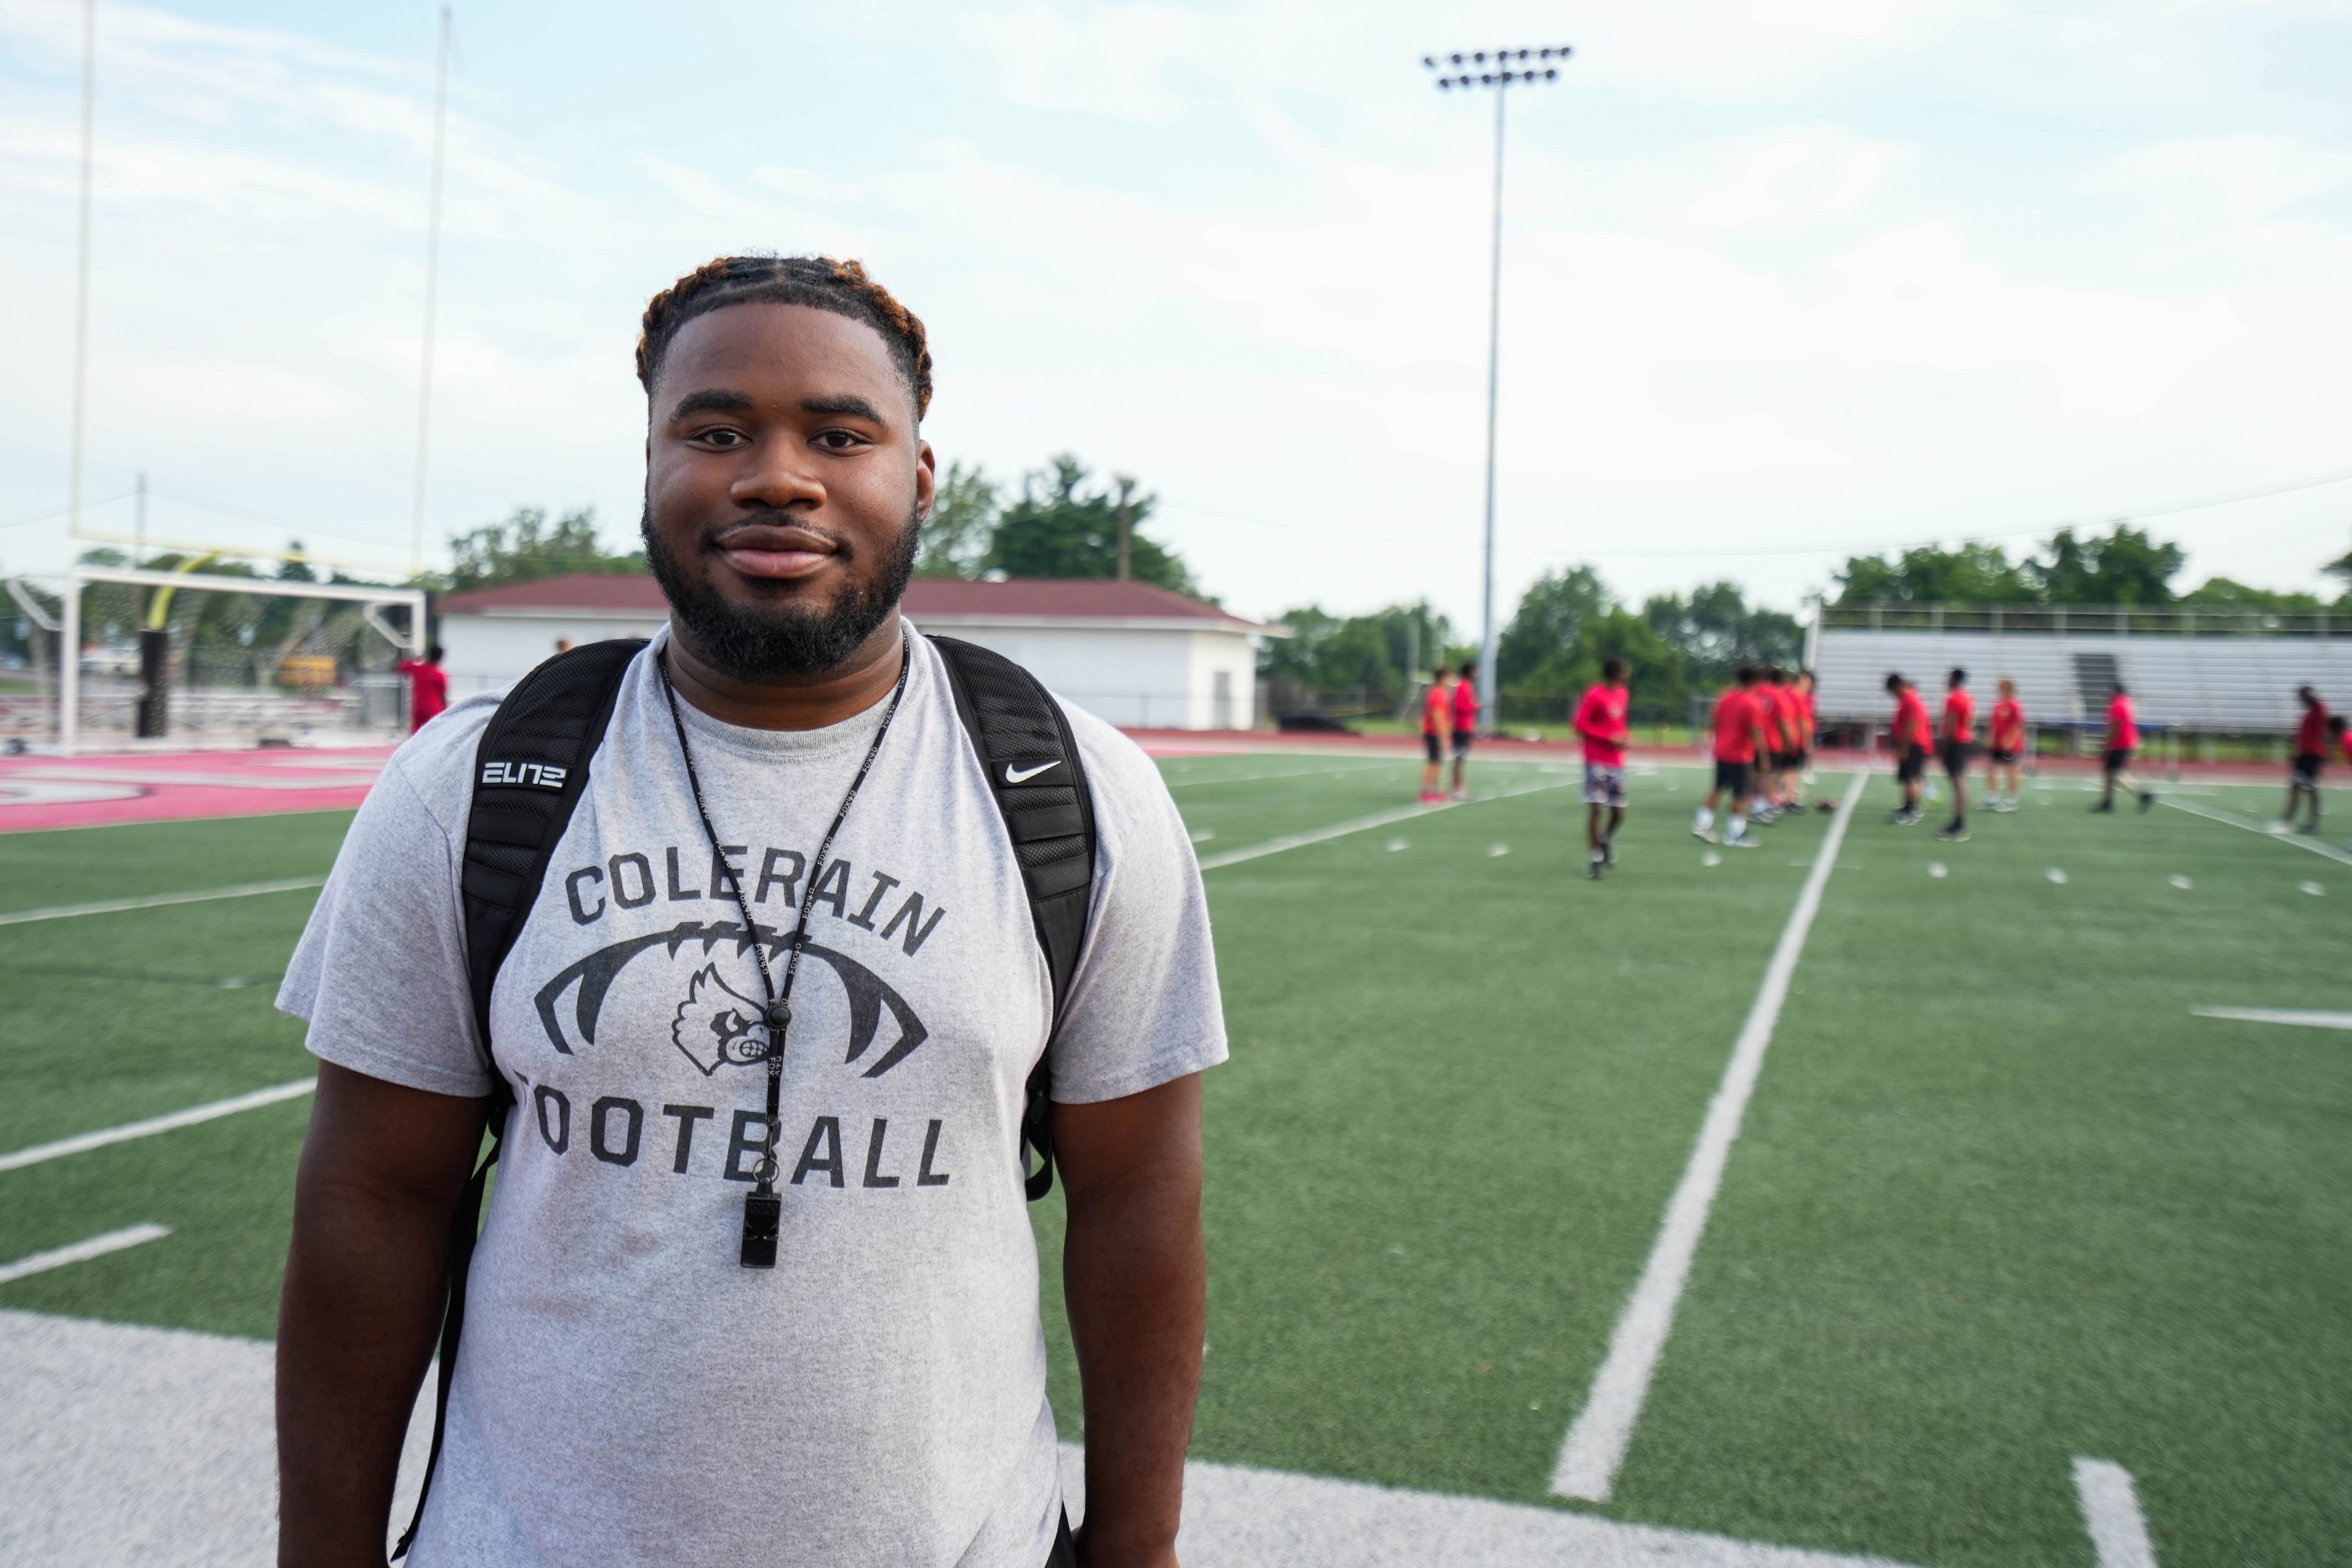 College student, coach takes UC path to bring more Black teachers to Ohio schools